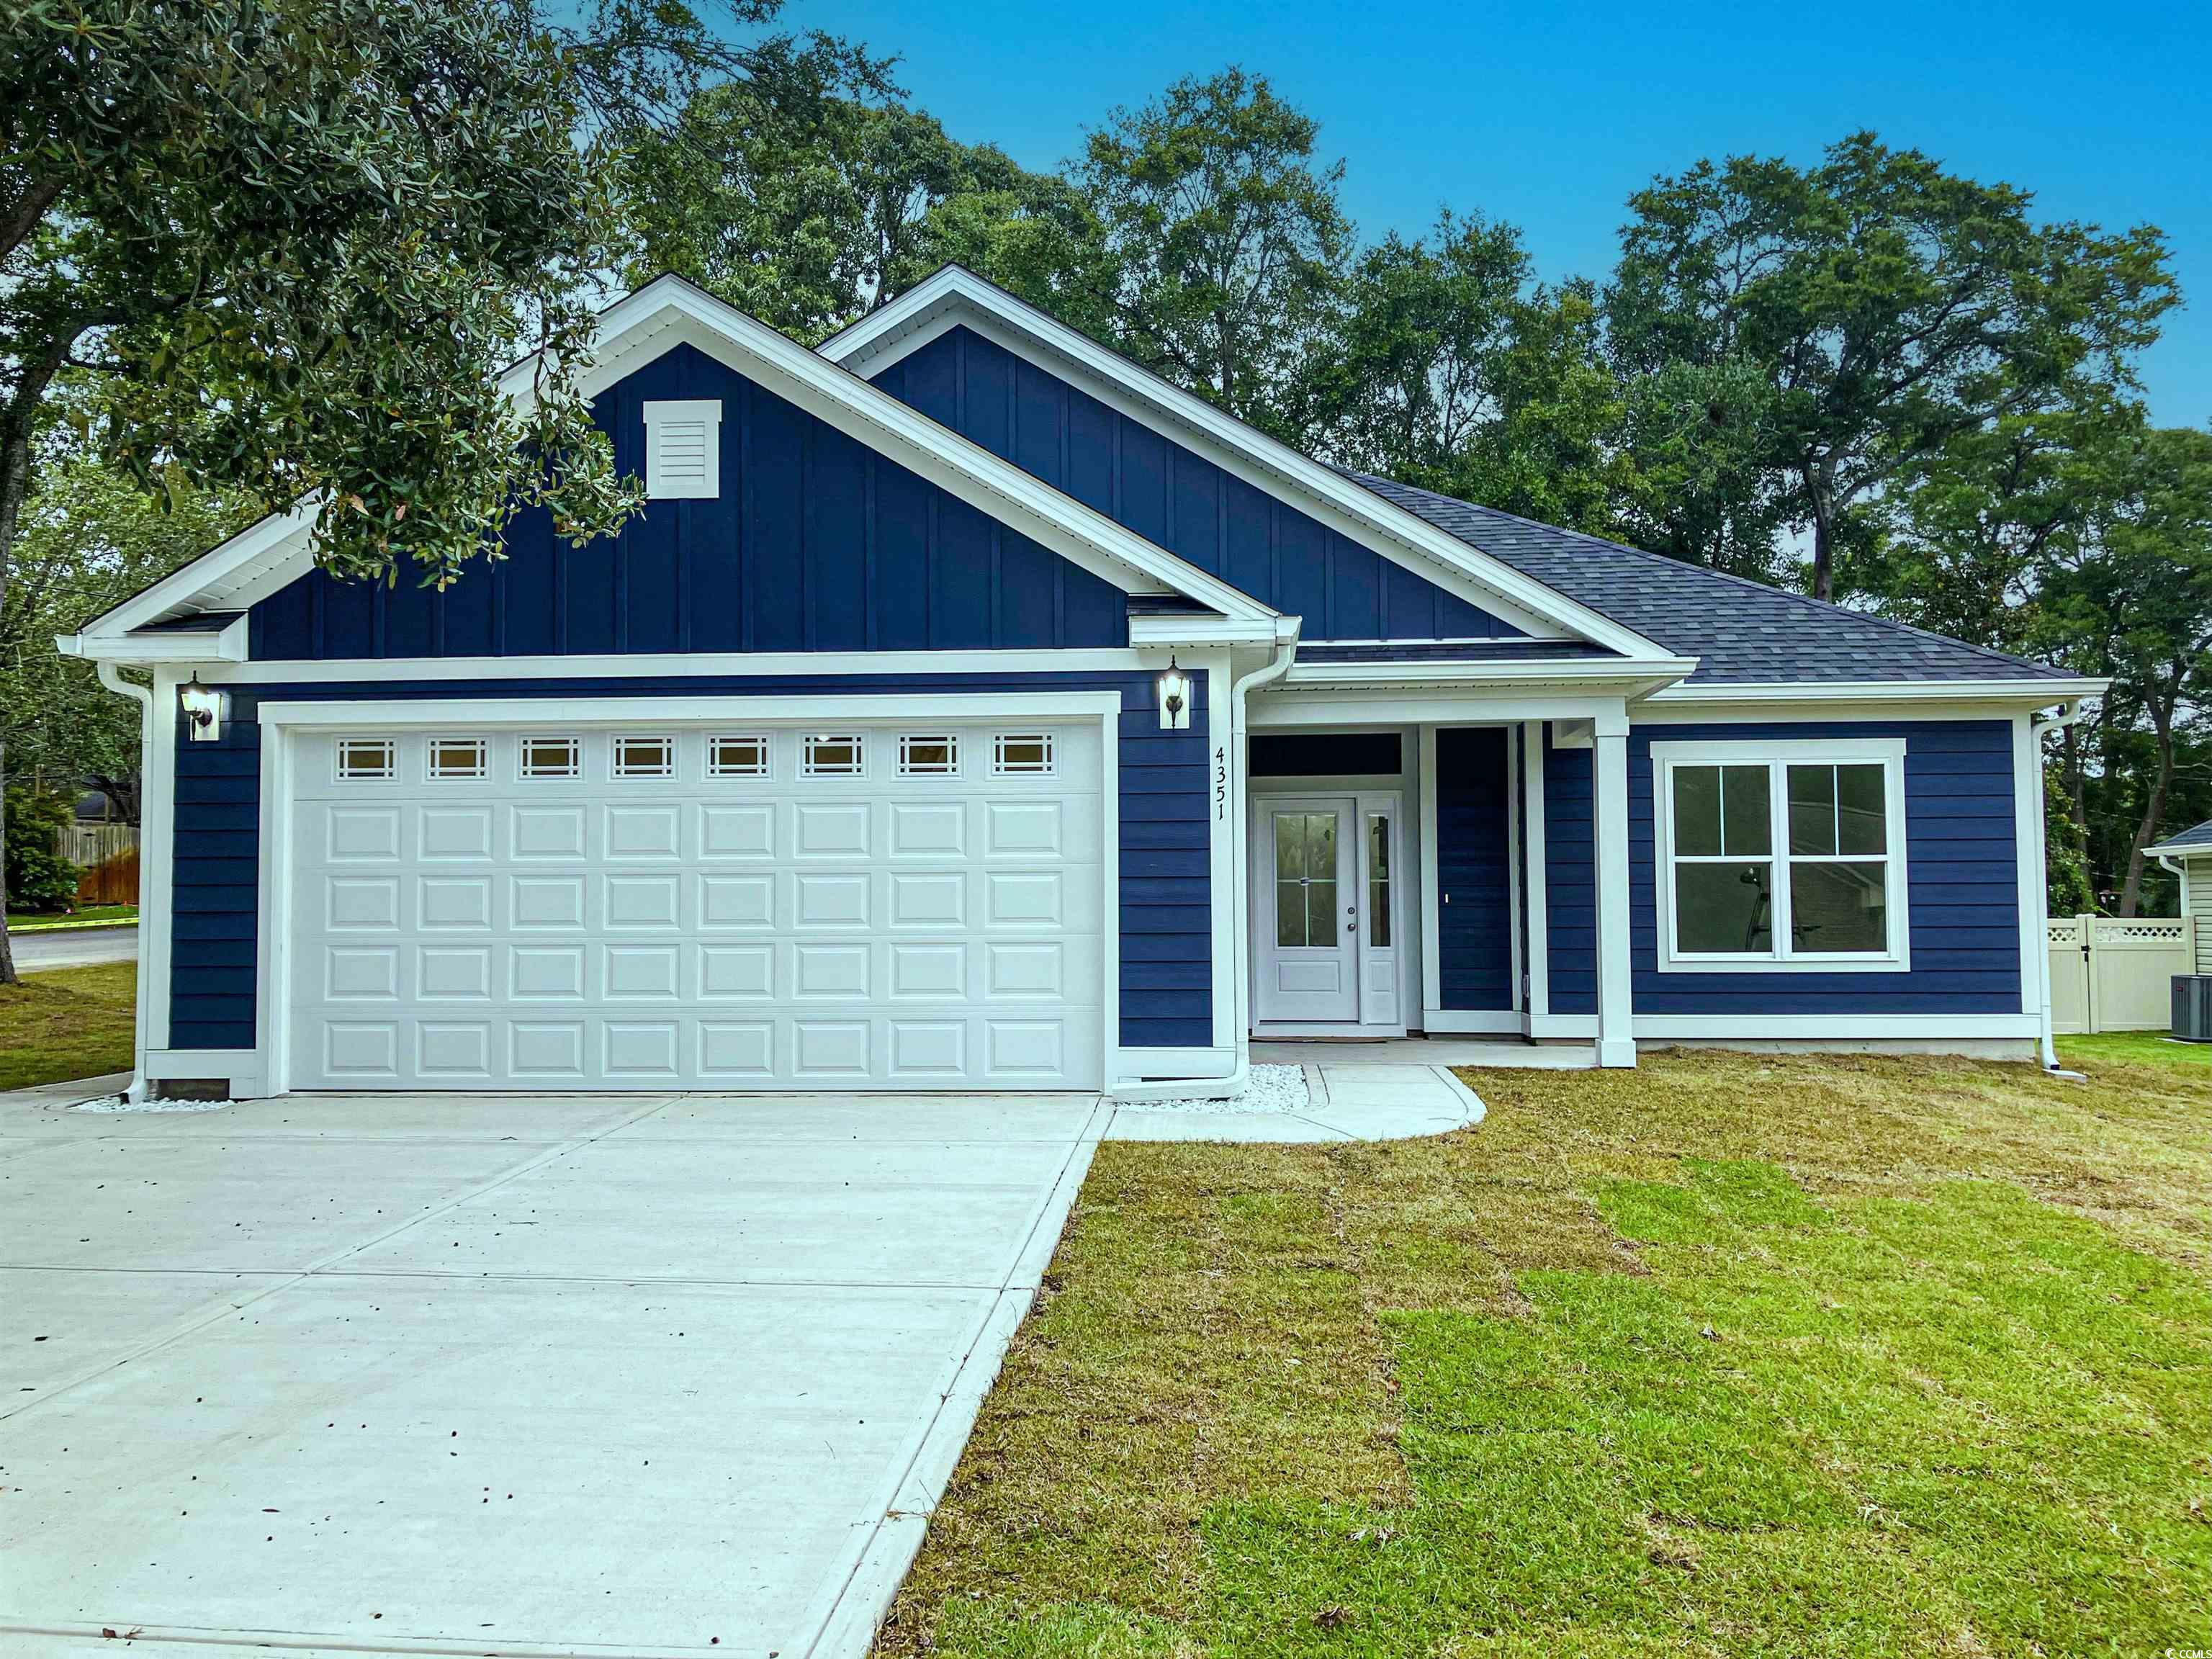 welcome to 4317 live oak dr, a stunning brand new, custom built 3-bedroom, 2.5-bathroom home on nearly half an acre and less than 15 minutes away from the ocean. if you act fast enough, you will even be able to choose some of your own finishes and special customizations. this large home is over 2000 heated square feet and offers an open floor plan design with thoughtful features and upgrades. this residence is a perfect blend of comfort and elegance. upon entering through the foyer, you will walk into the large kitchen, a culinary enthusiast's dream. the kitchen boasts stylish stainless steel appliances, a large pantry, custom cabinetry, a farmhouse-style sink, and even a waterfall island/bar area. your living room and kitchen is open and bright, characterized by high ceilings, an easy flow to the rest of the home, and an abundance of natural light. the master bedroom features a massive walk-in closet and 10 foot ceilings. the master bathroom exudes luxury with a dual sink vanity and a large tiled walk-in shower. step outside and experience the charm of the front porch, perfect for taking in the sights and sounds of the friendly, quiet neighborhood. the covered screened-in back porch and patio offer a delightful space for entertaining or simply unwinding. situated in the charming town of little river, this property boasts convenience and tranquility. enjoy easy access to dining, shopping, golf courses, and of course the beach! book your showing today!